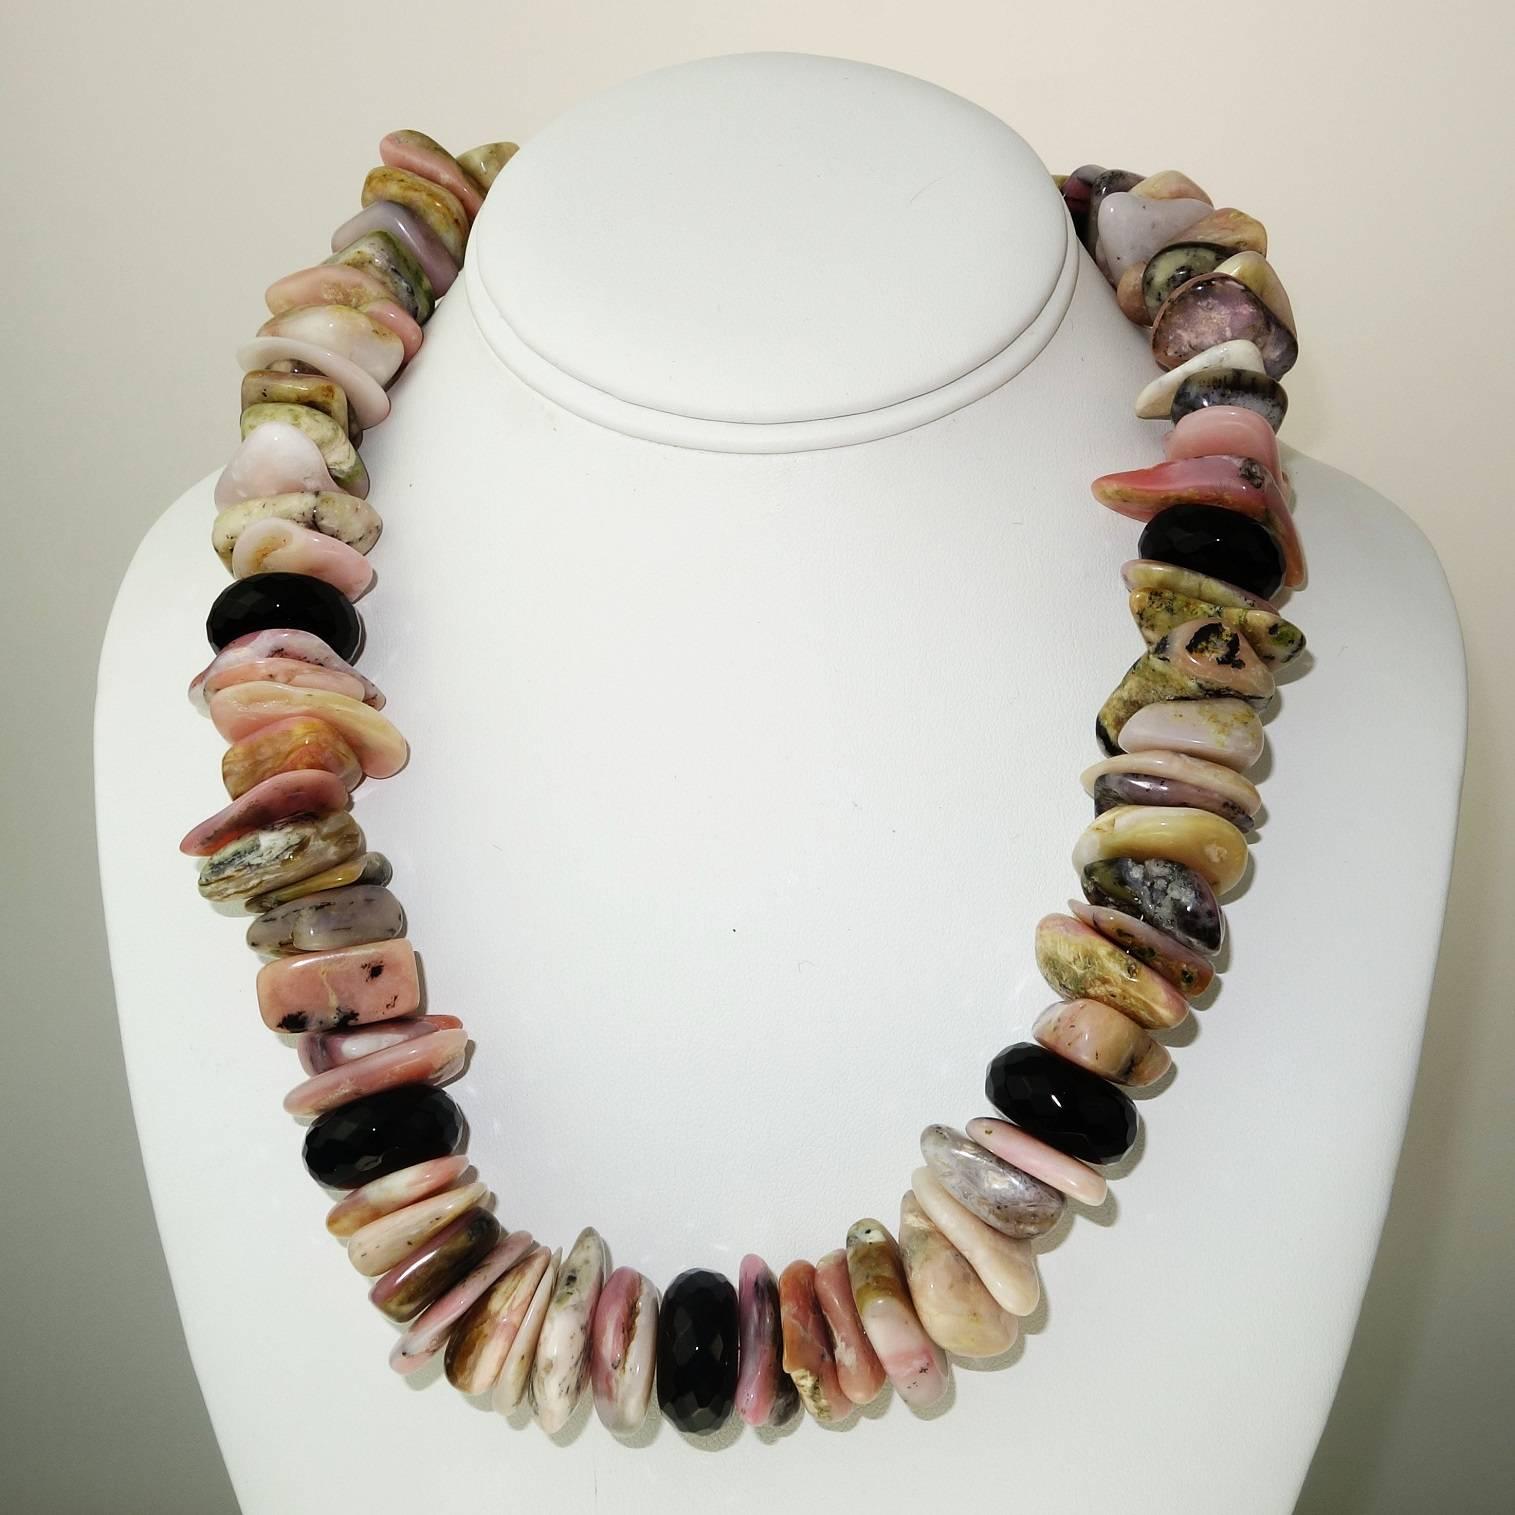 Tumbled, polished chunkly slices of Pink Peruvian Opal Necklace with Shiny 
 Faceted Black Onyx accents. Statement necklace of 20.5 inches in fabulous shades of pink. The matrix in some of the gemstones enhances the unique character of the necklace.